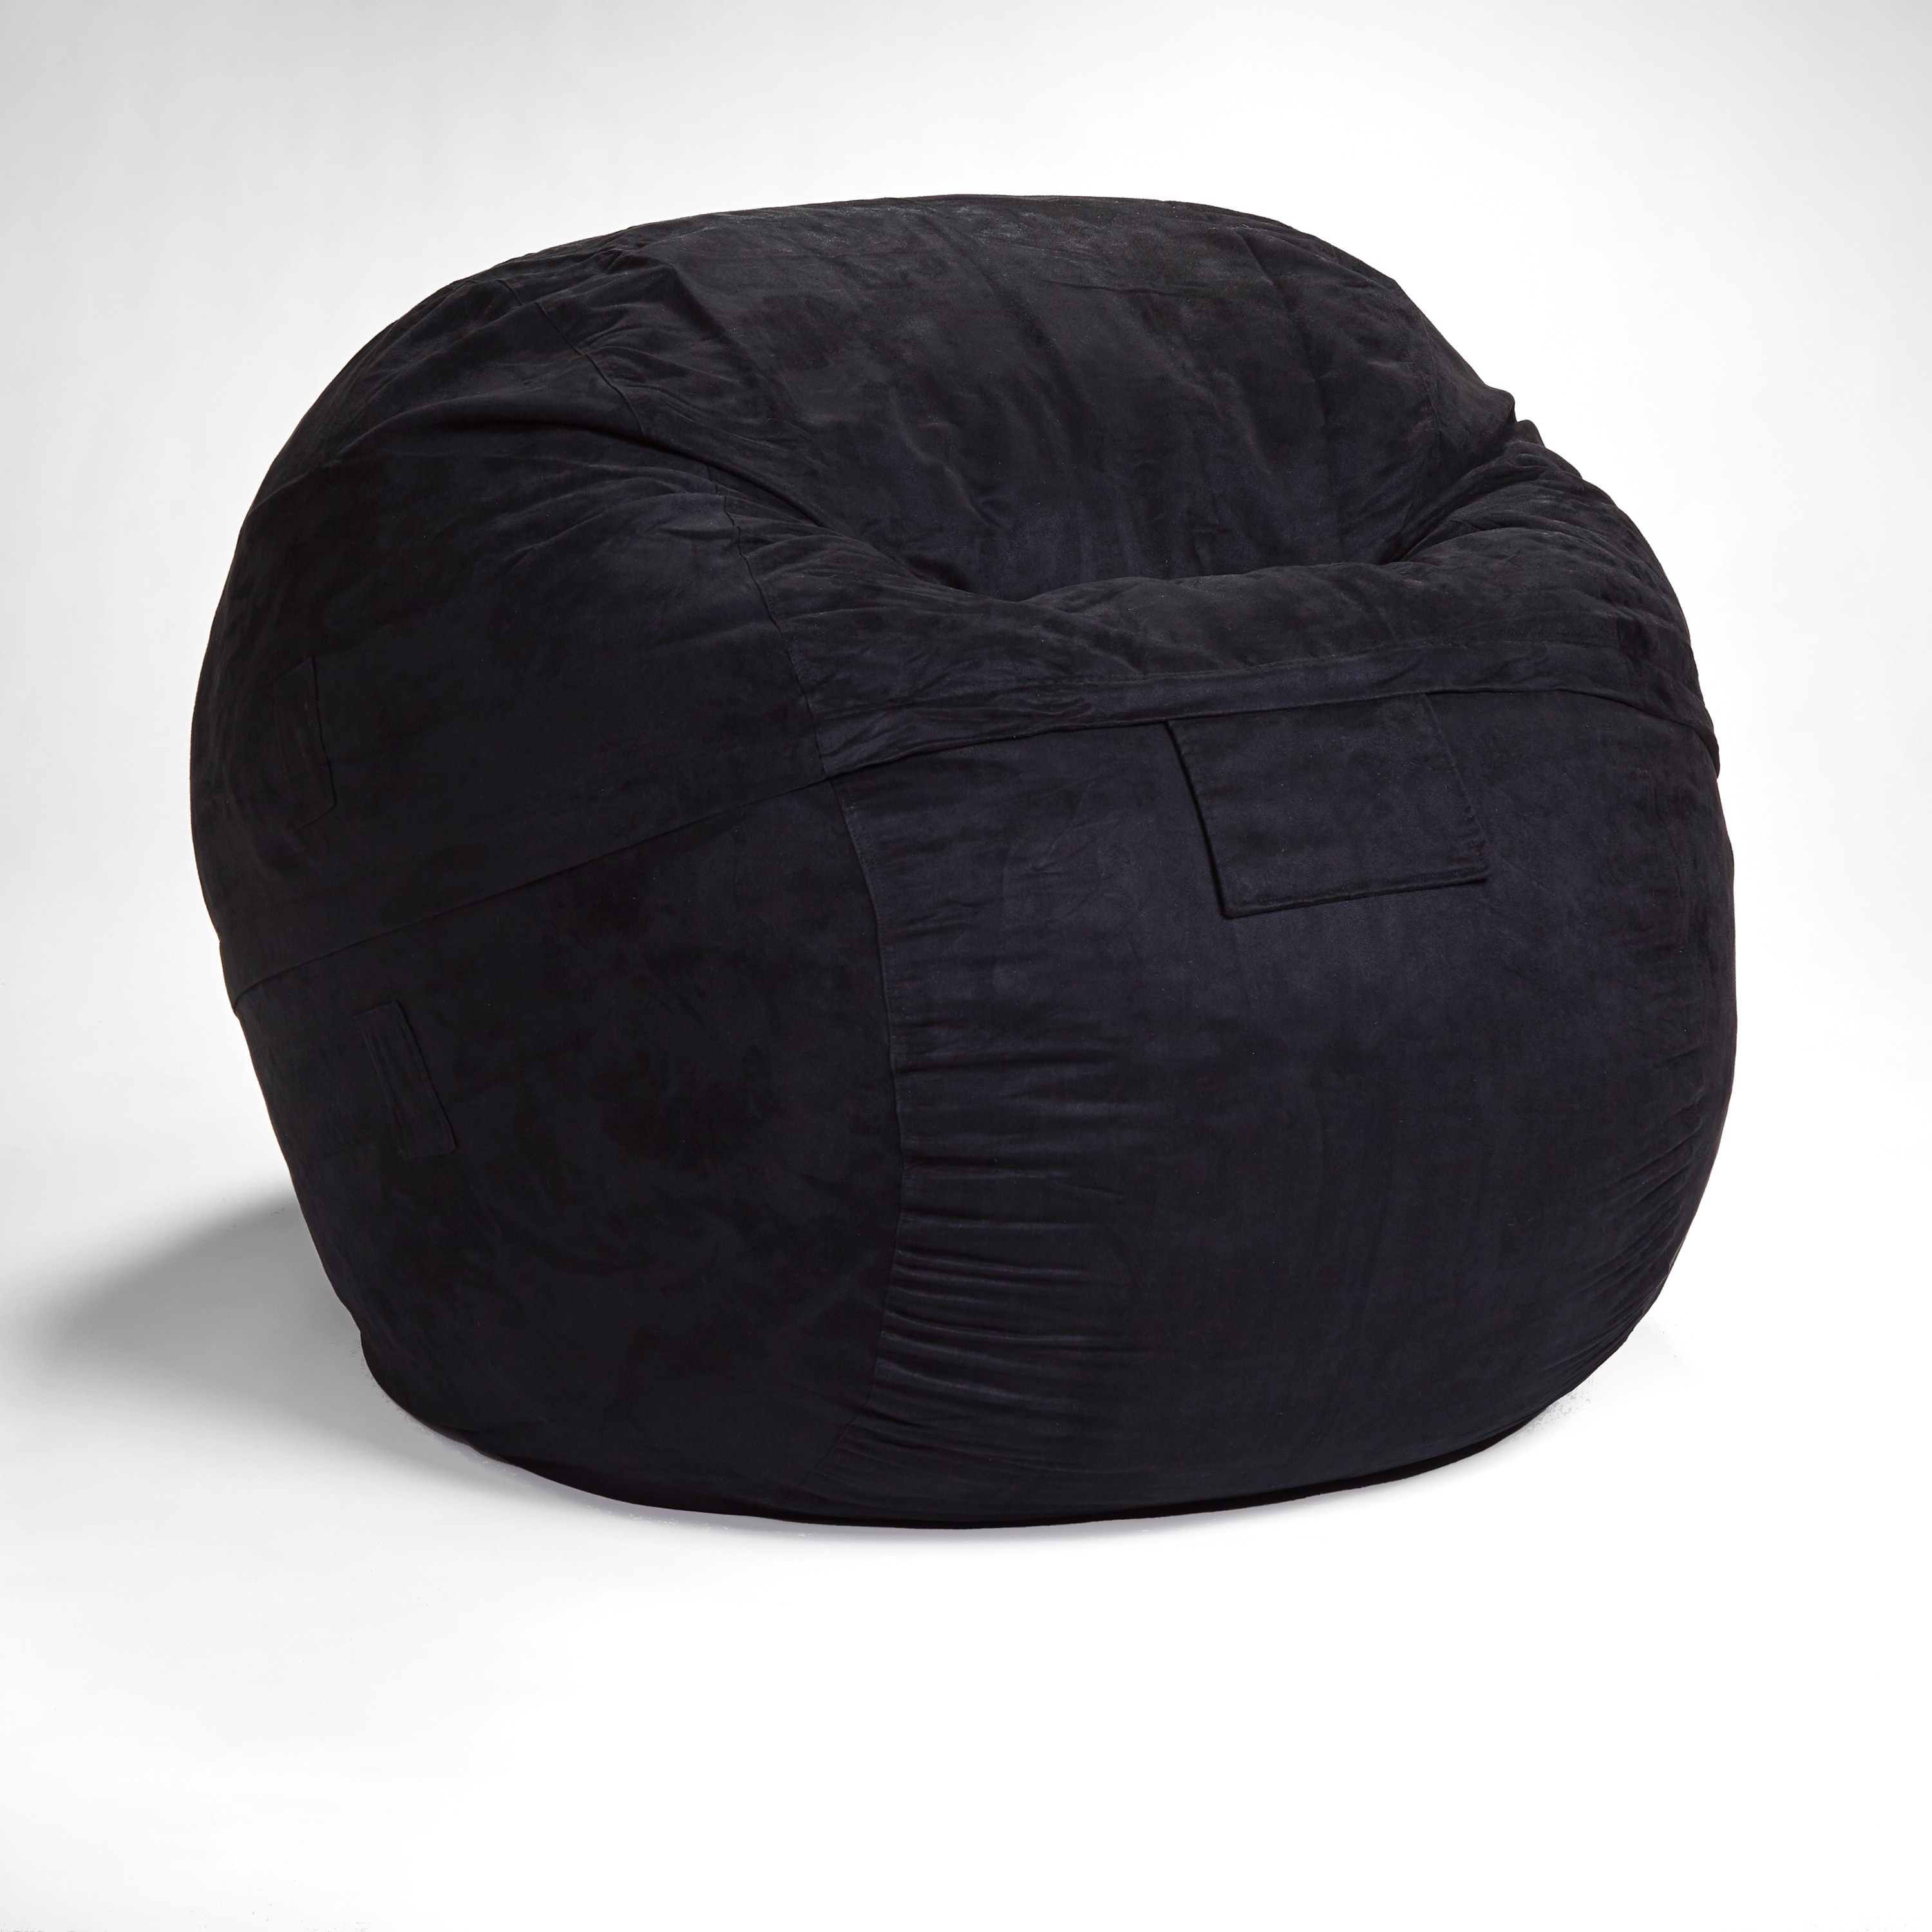  AJD Home Chocolate Bean Bag Chair Adult Size, Large